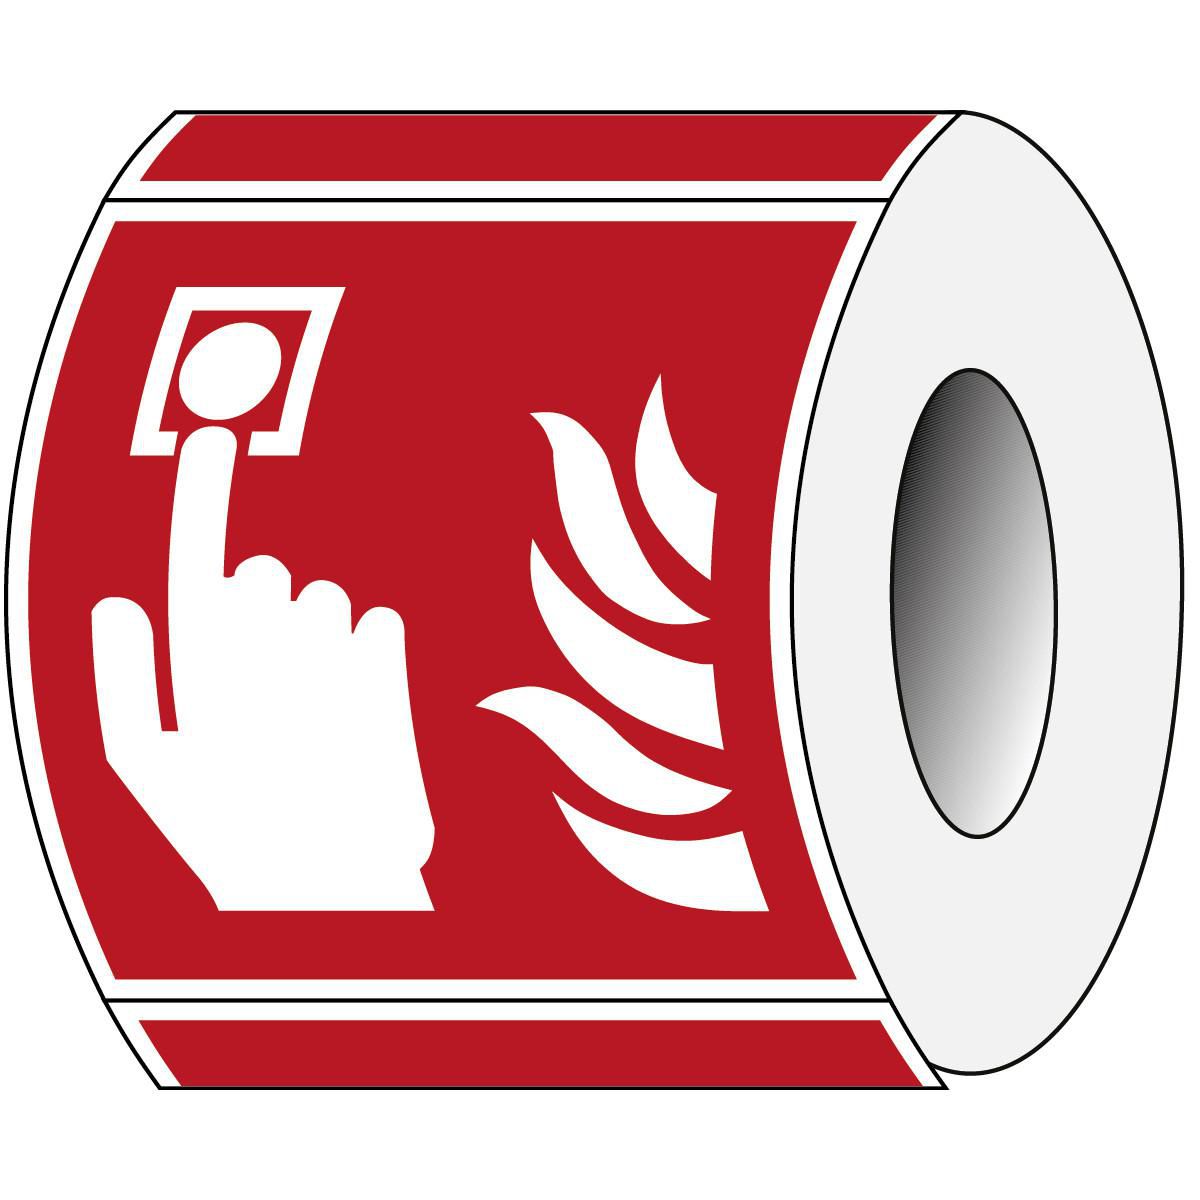 Brady PIC F005-100X100-PE-ROLL1 W128413287 ISO Safety Sign - Fire alarm 